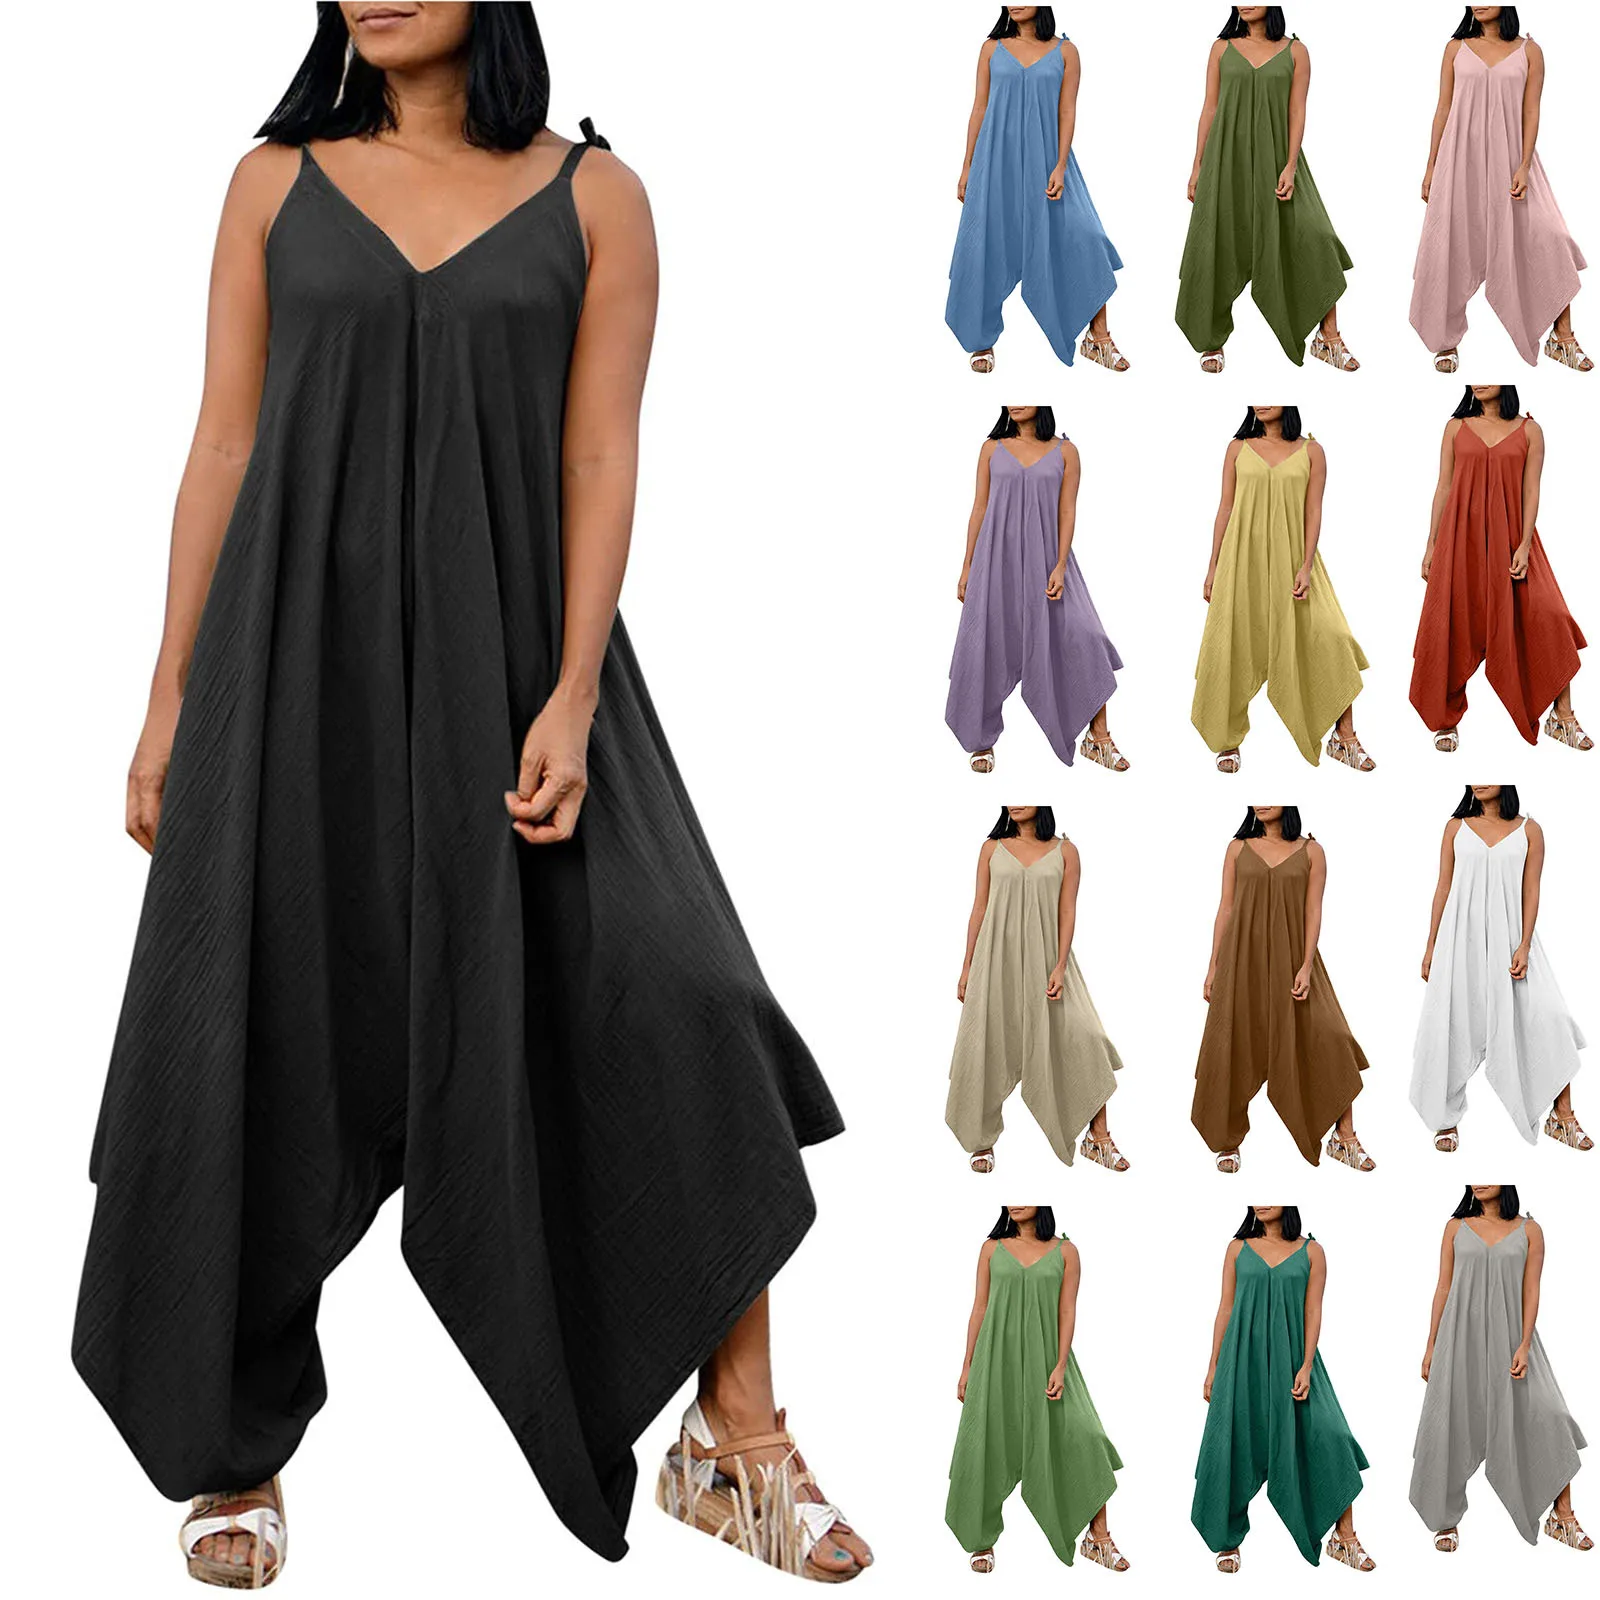 loose maternity strap shorts bib pant suspender trouser summer casual female women button down romper overalls strap jumpsuit Loose Maternity Bib Pant Suspender Trouser Casual Female Women V-Neck One-Piece Wide Leg Romper Overalls Strap Jumpsuit Oversize